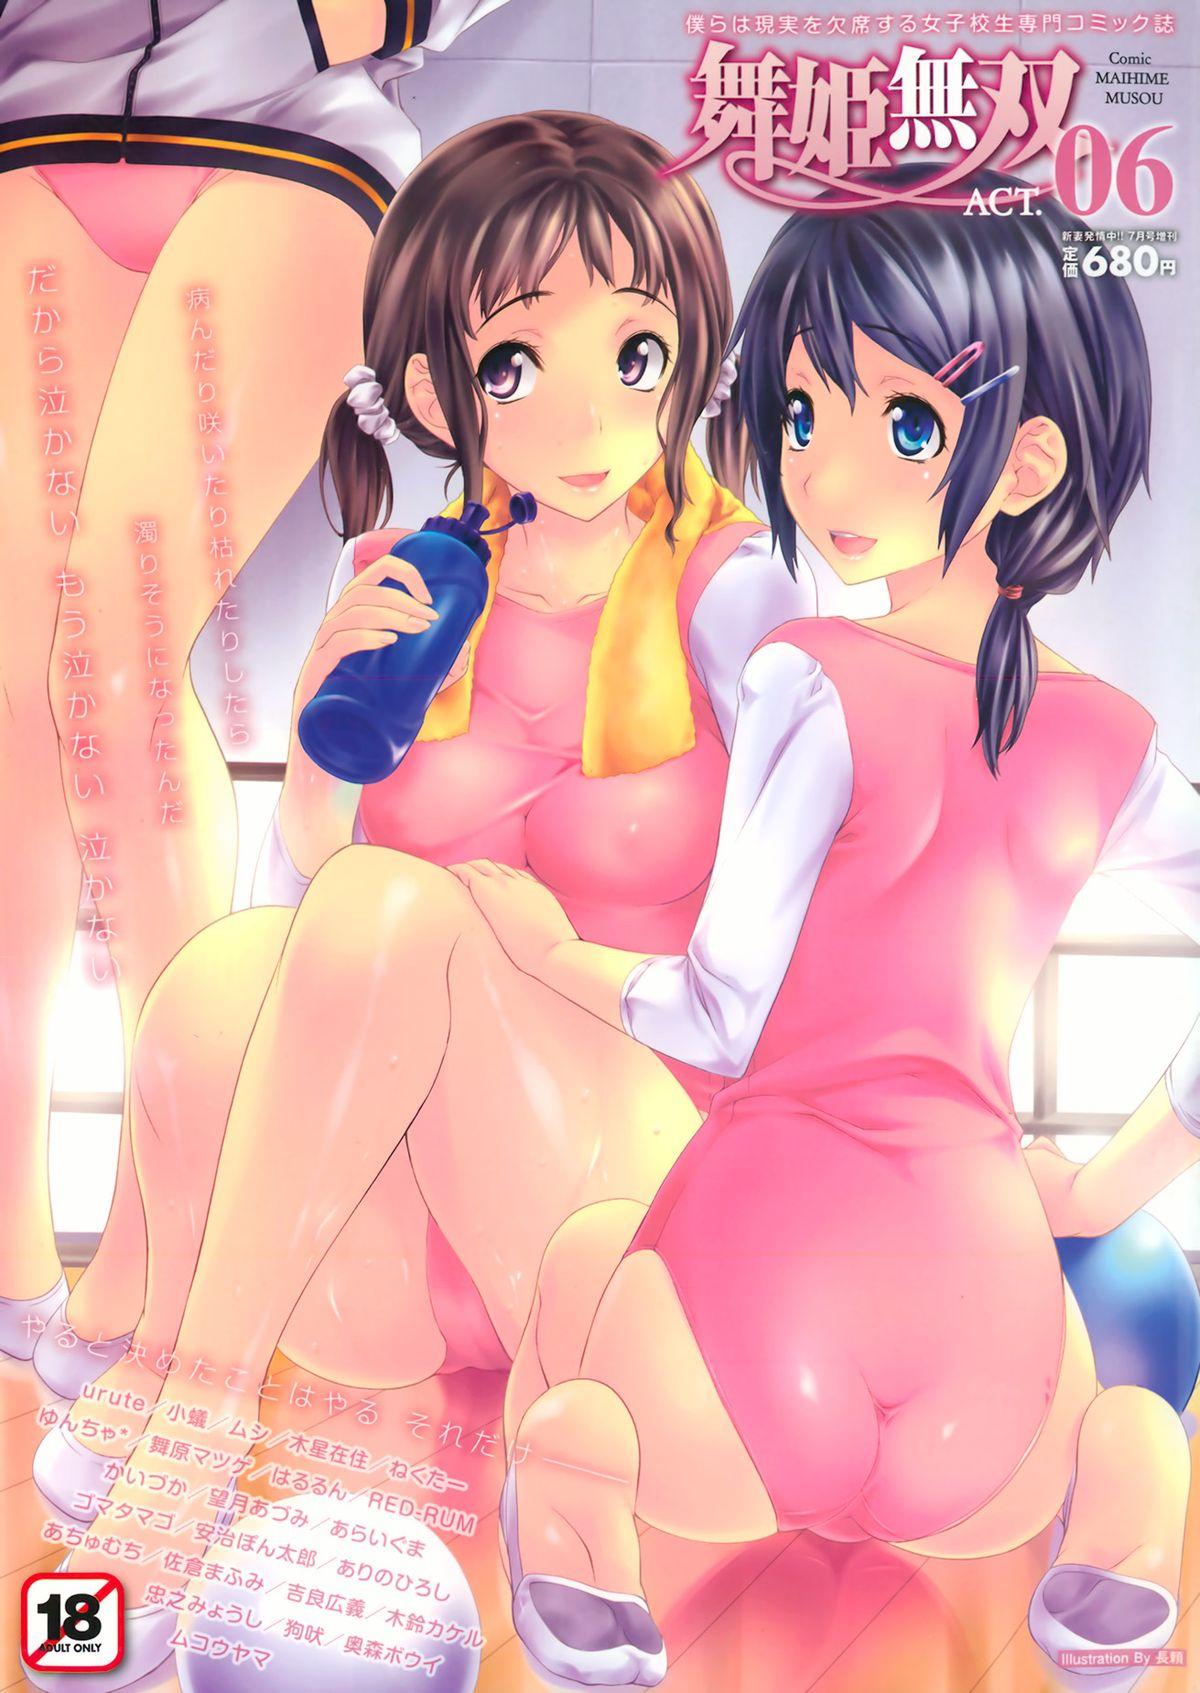 Hot Girl COMIC Maihime Musou Act. 06 2013-07 Pay - Picture 1